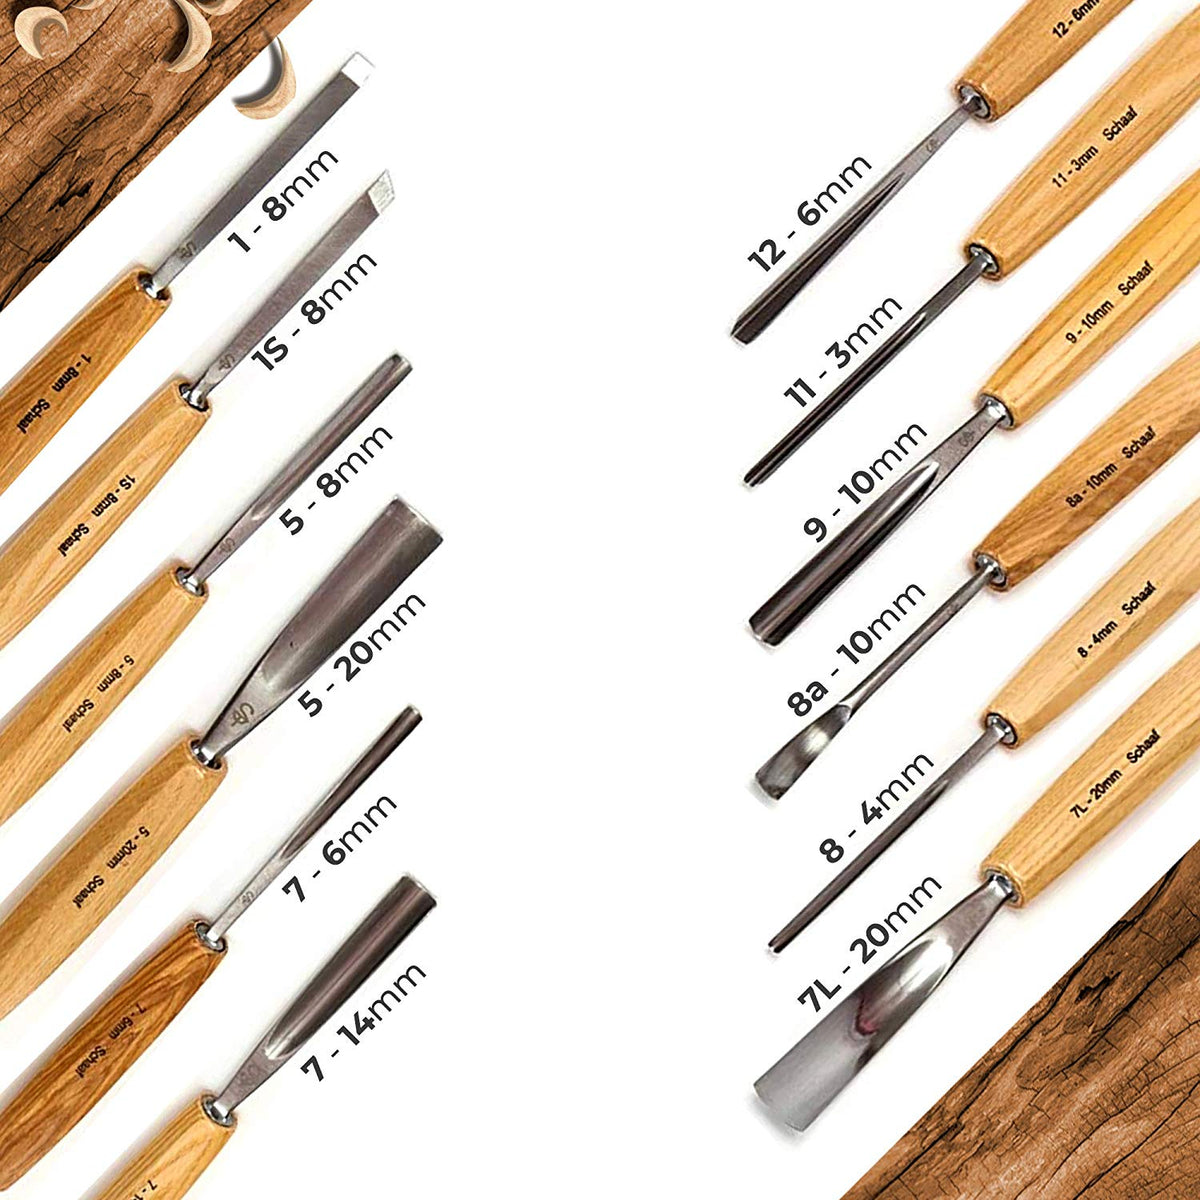 Schaaf Tools Schaaf Wood Carving Tools, 7pc Expansion Chisel Set with Canvas Case | Full Size Gouges for Beginners, Hobbyists and Profession